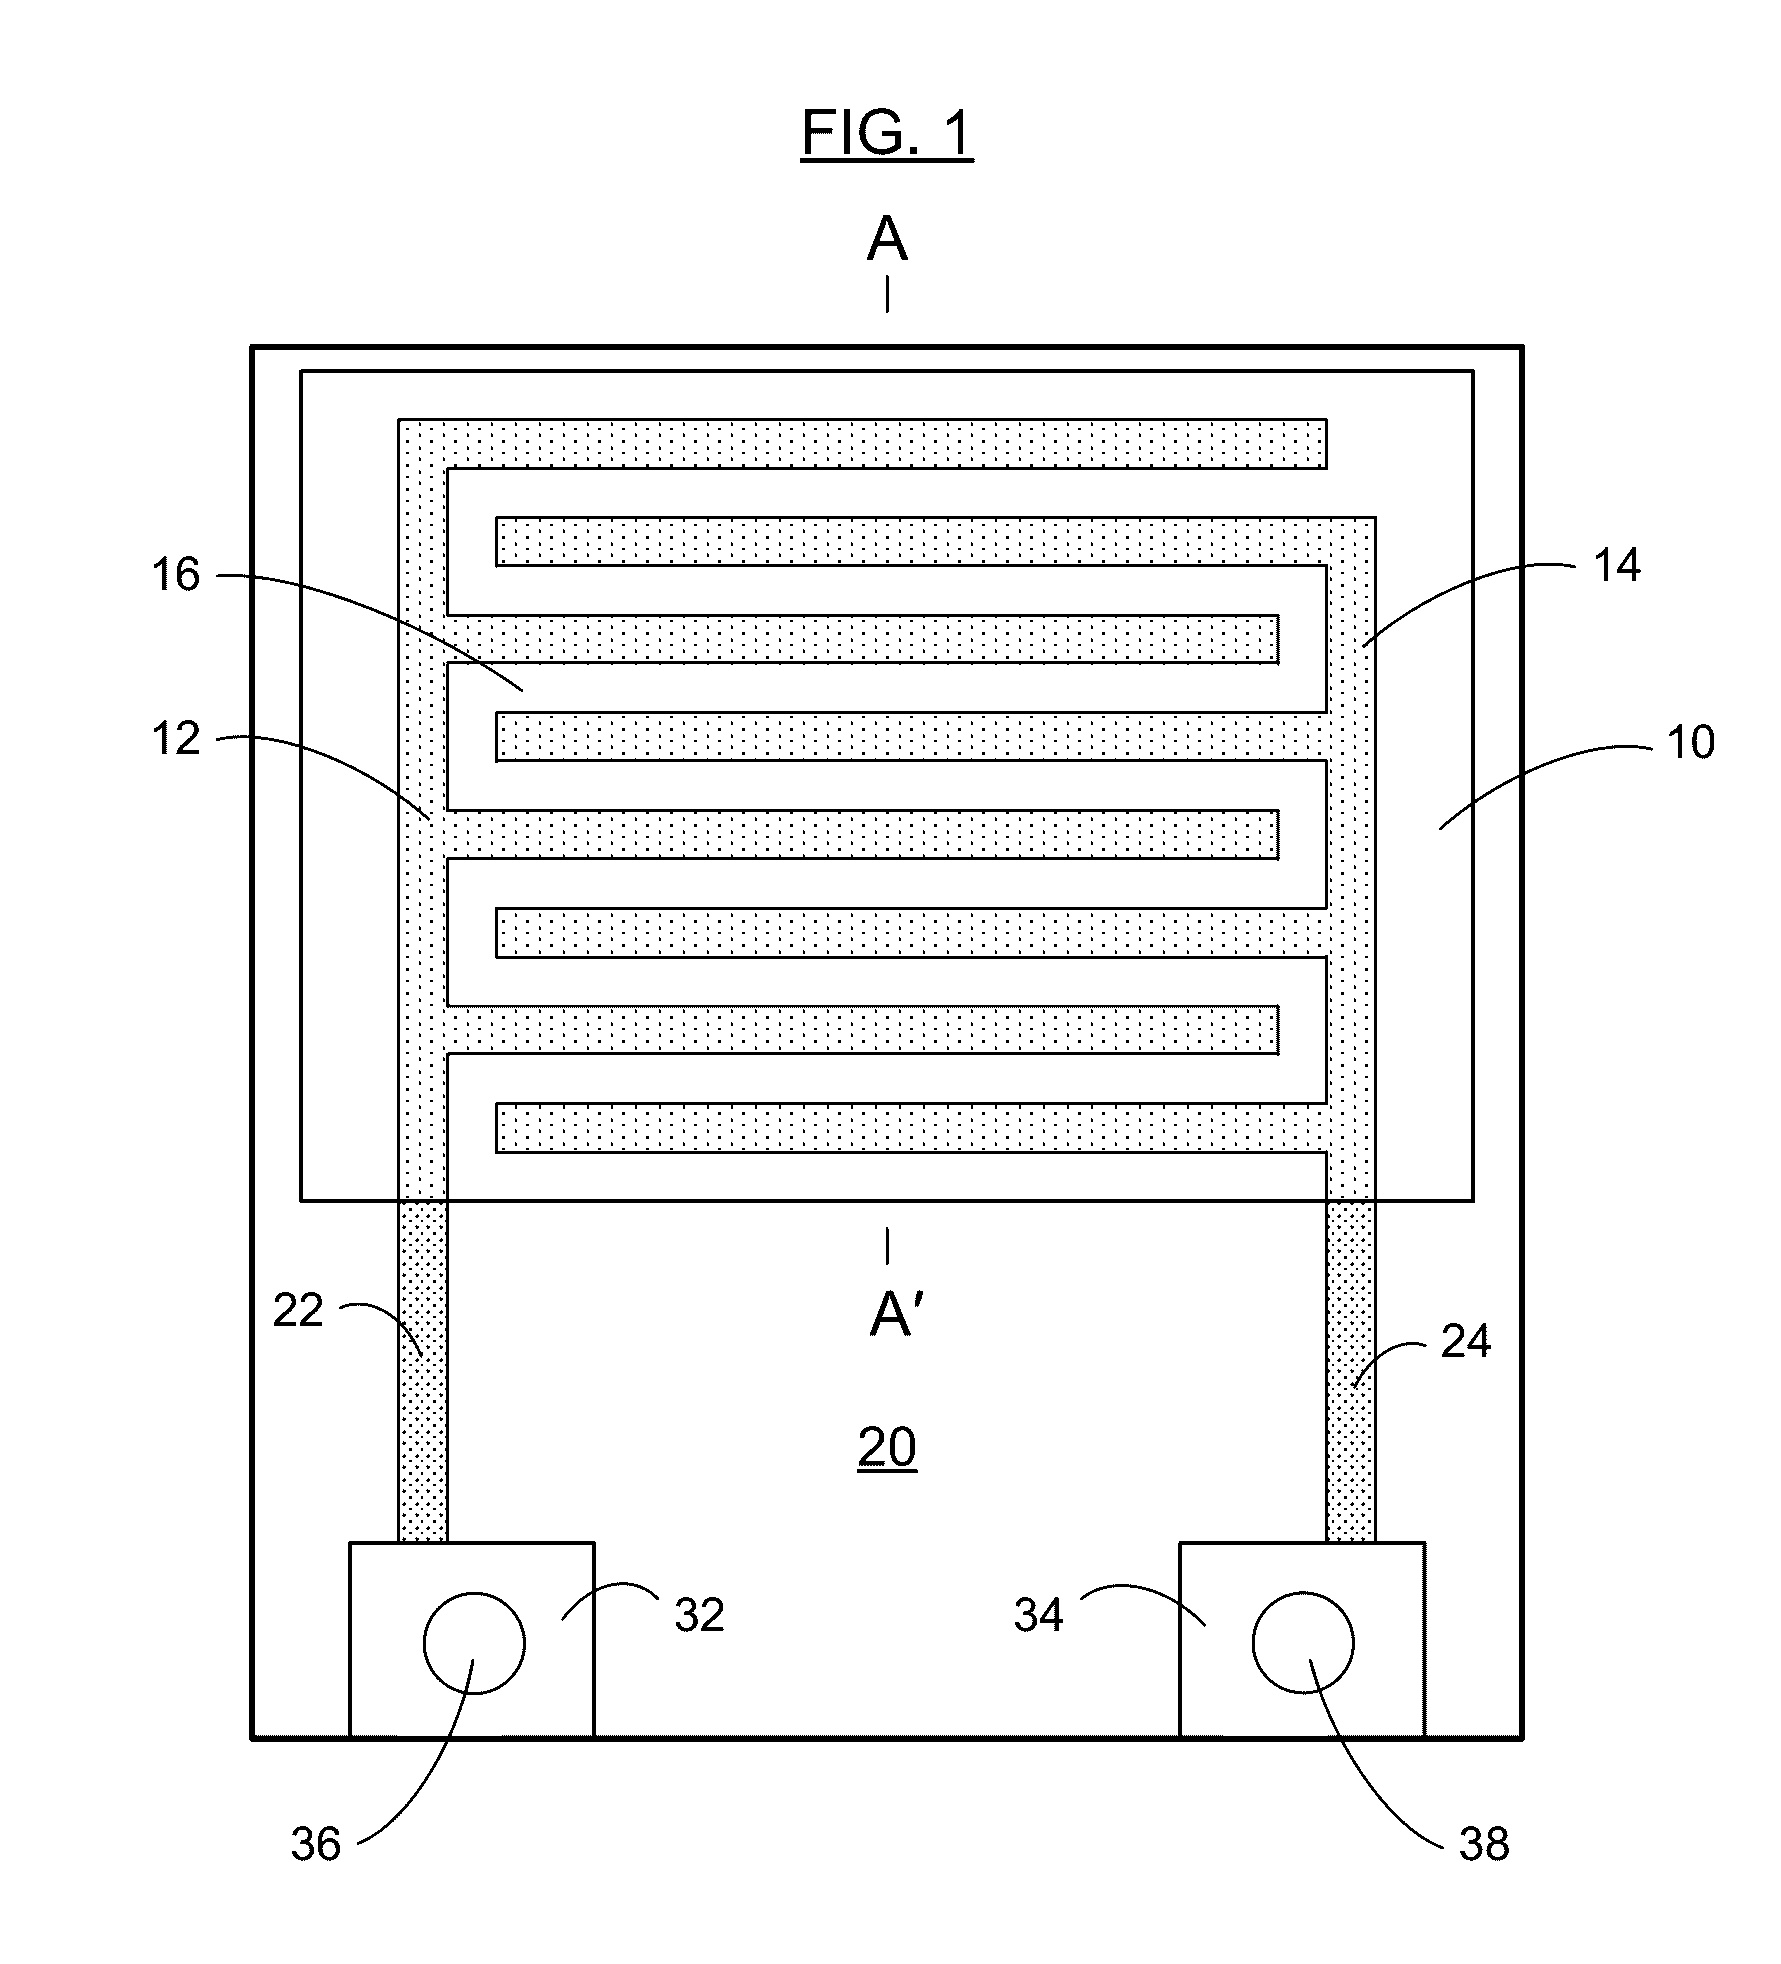 Humidity Sensor, Wireless Device Including the Same, and Methods of Making and Using the Same